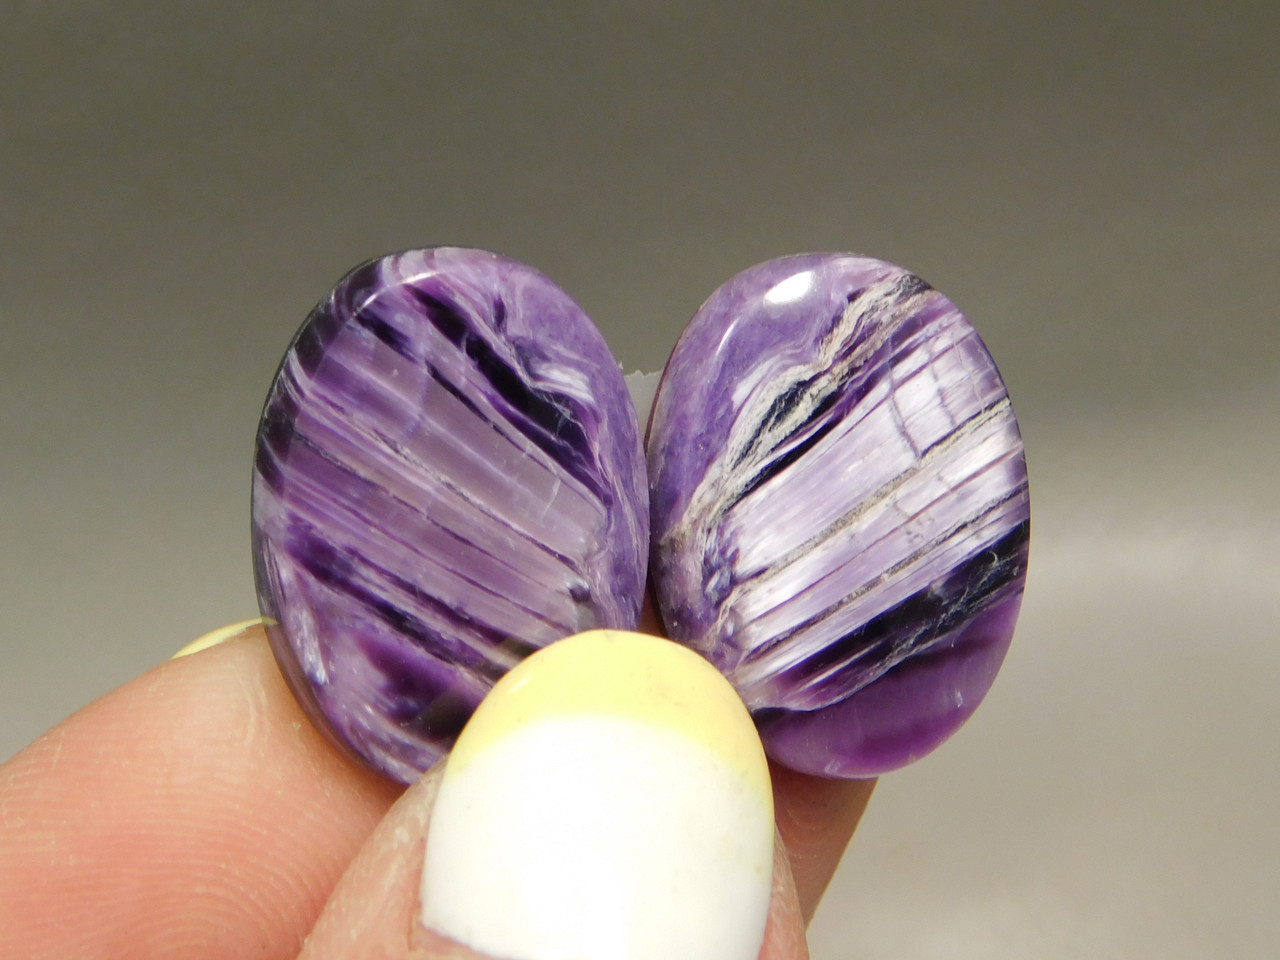 Purple Charoite Cabochons 18 mm by 13 mm Stones Matched Pairs #23